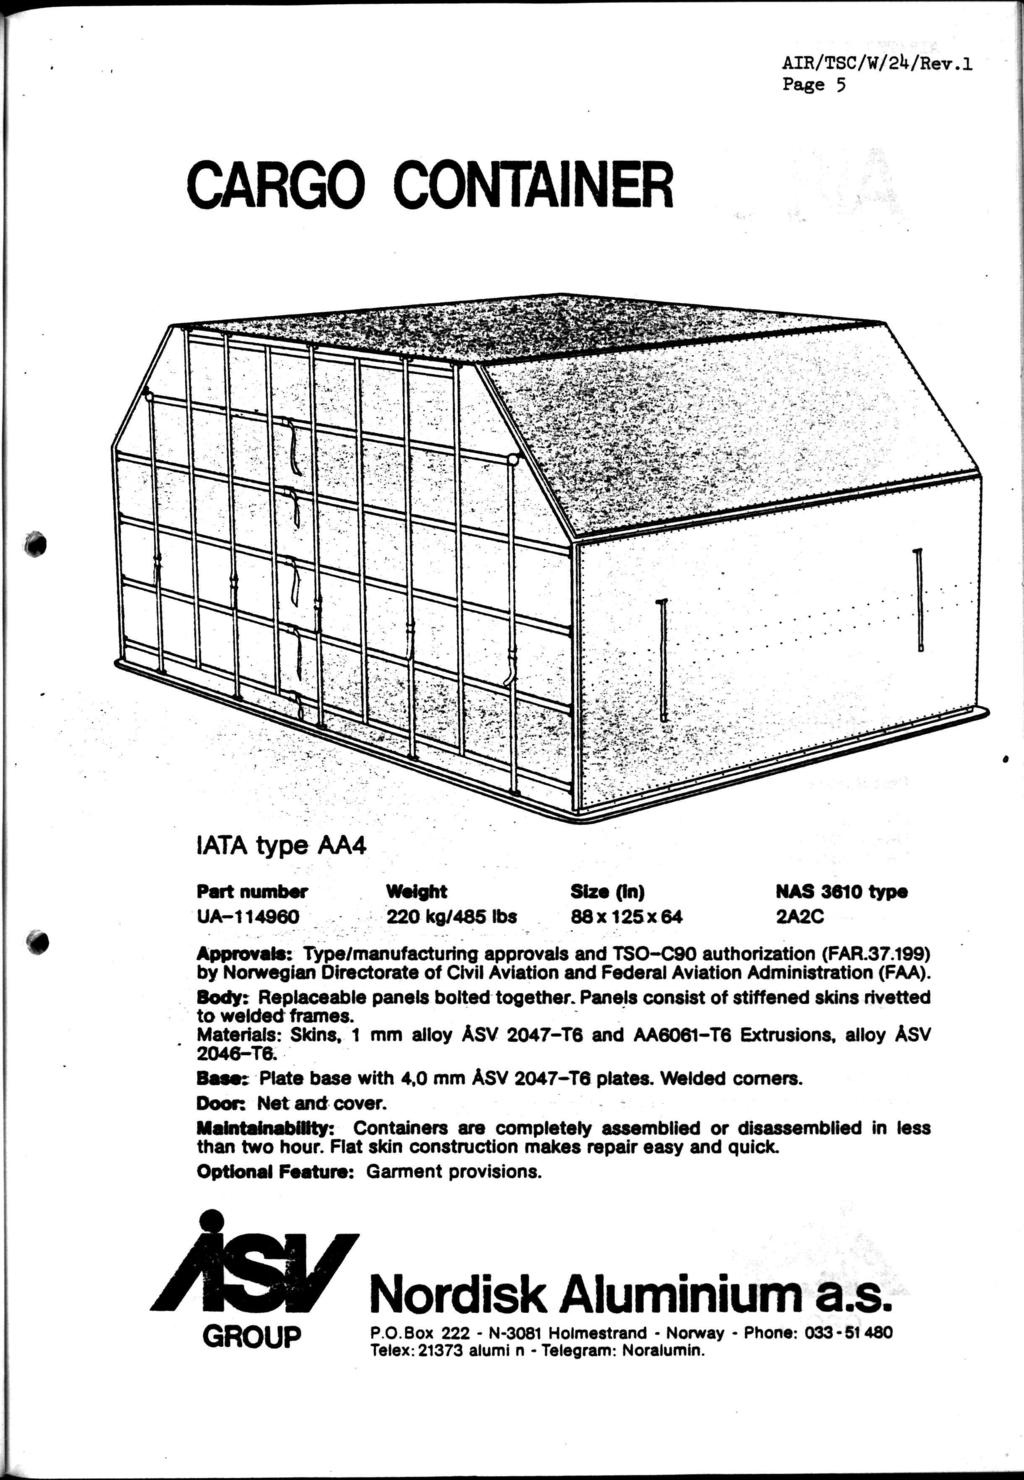 Page 5 CARGO CONTAINER % IATA type AA4 Part number UA-114960 Weight 220 kg/485 lbs Size (in) 88x125x64 NAS 3610 type 2A2C Approvals: Type/manufacturing approvals and TSO-C90 authorization (FAR.37.